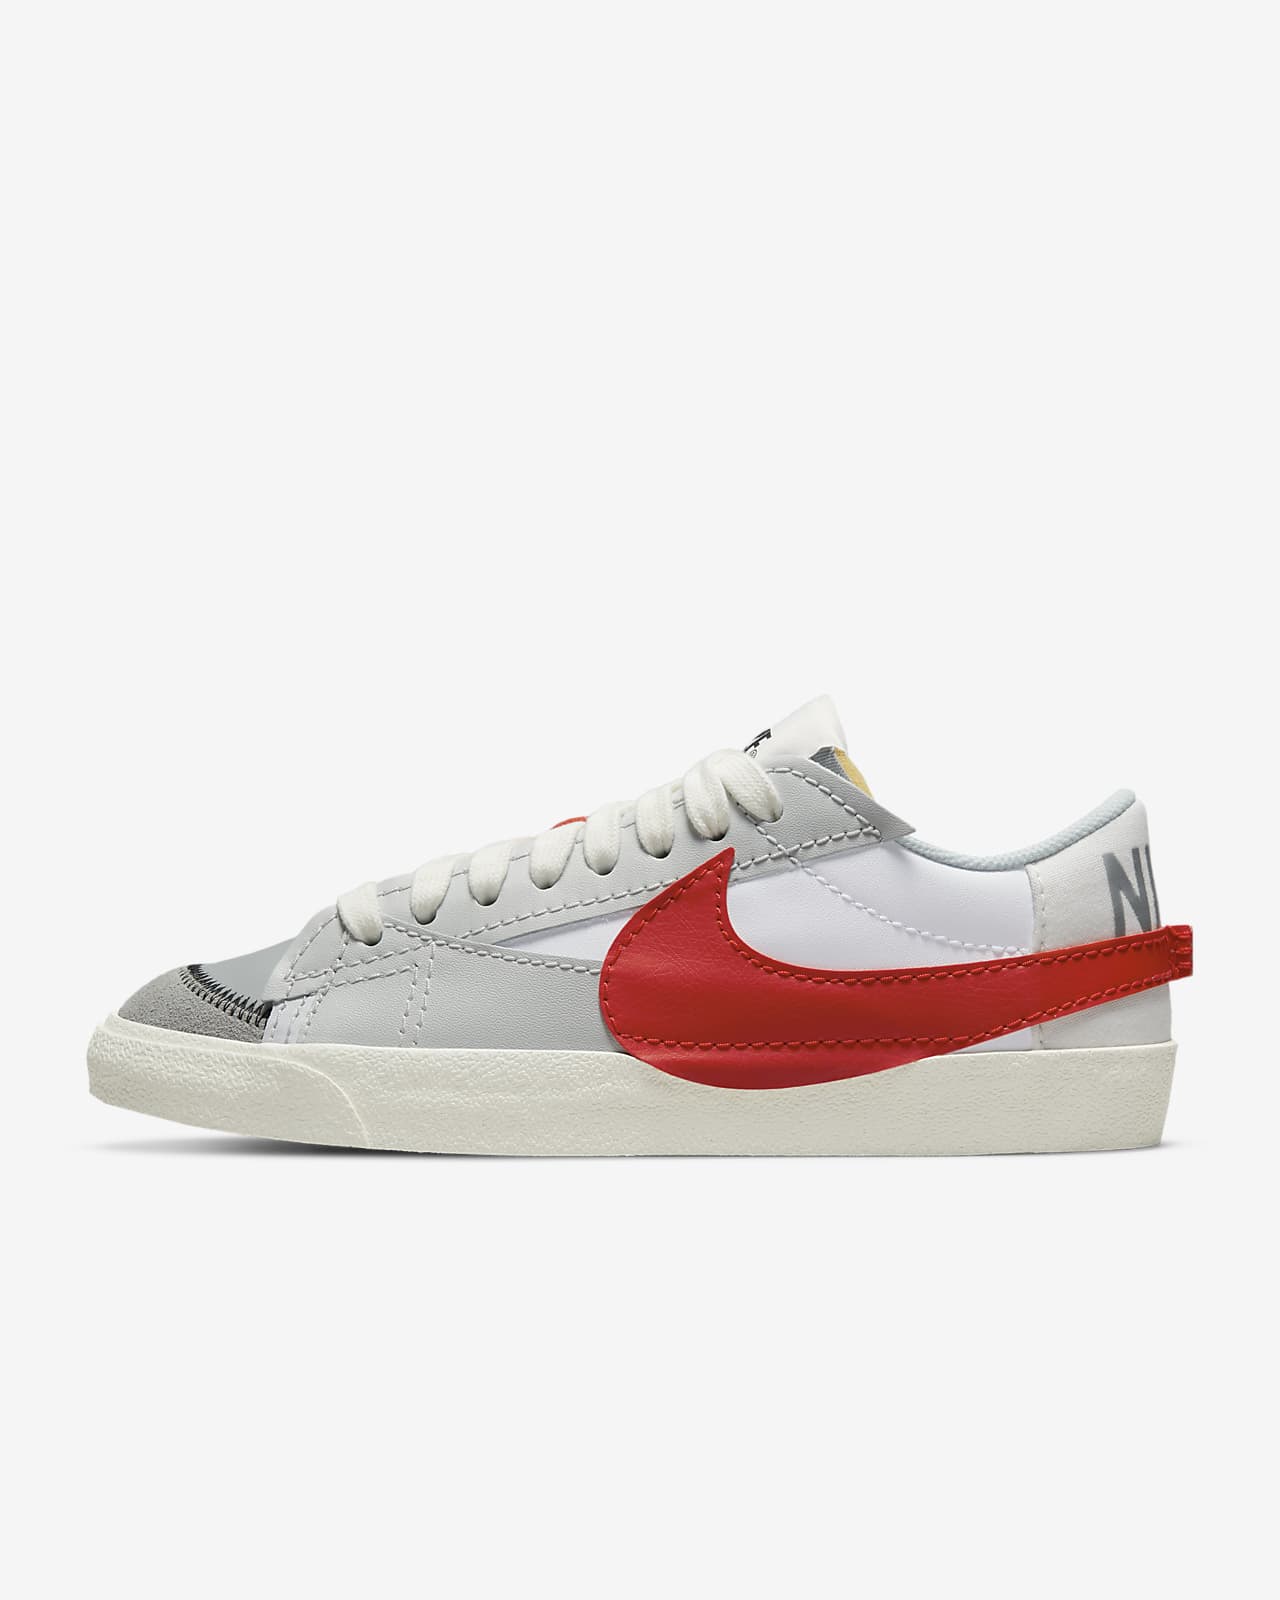 Chaussure Nike Blazer Low '77 Jumbo pour Homme